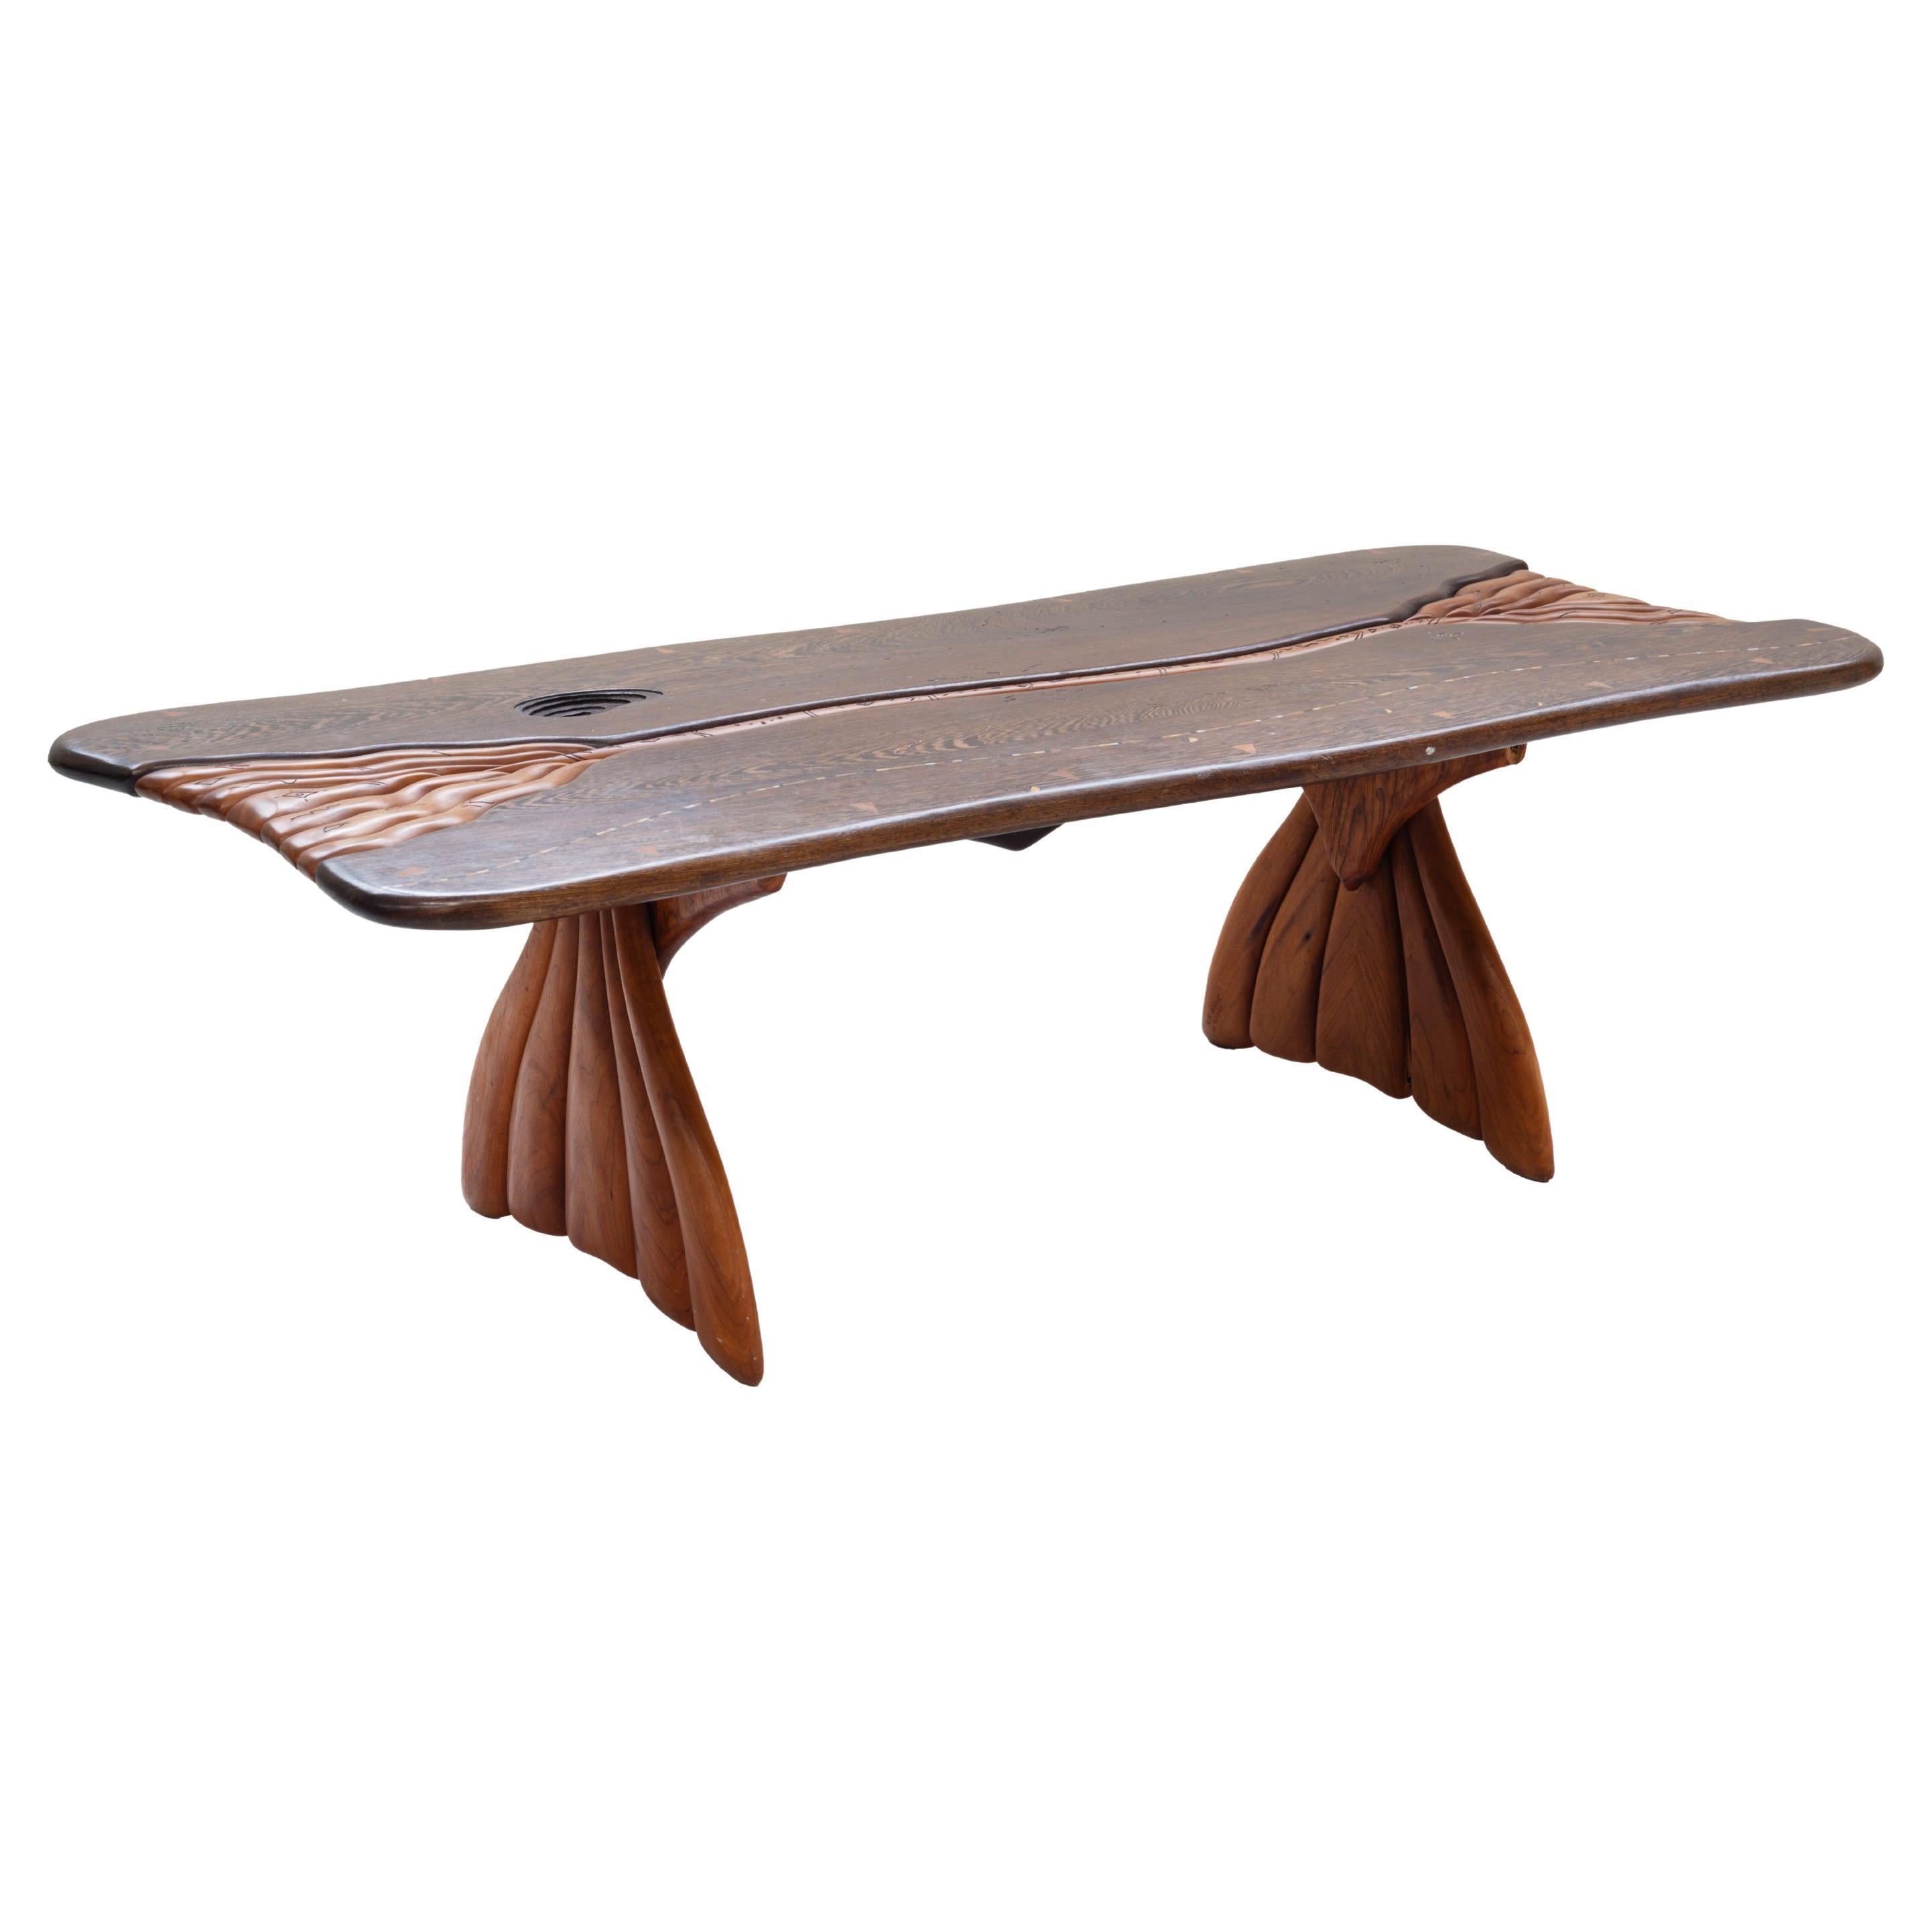 Steven Spiro Hand Carved Coffee Table For Sale